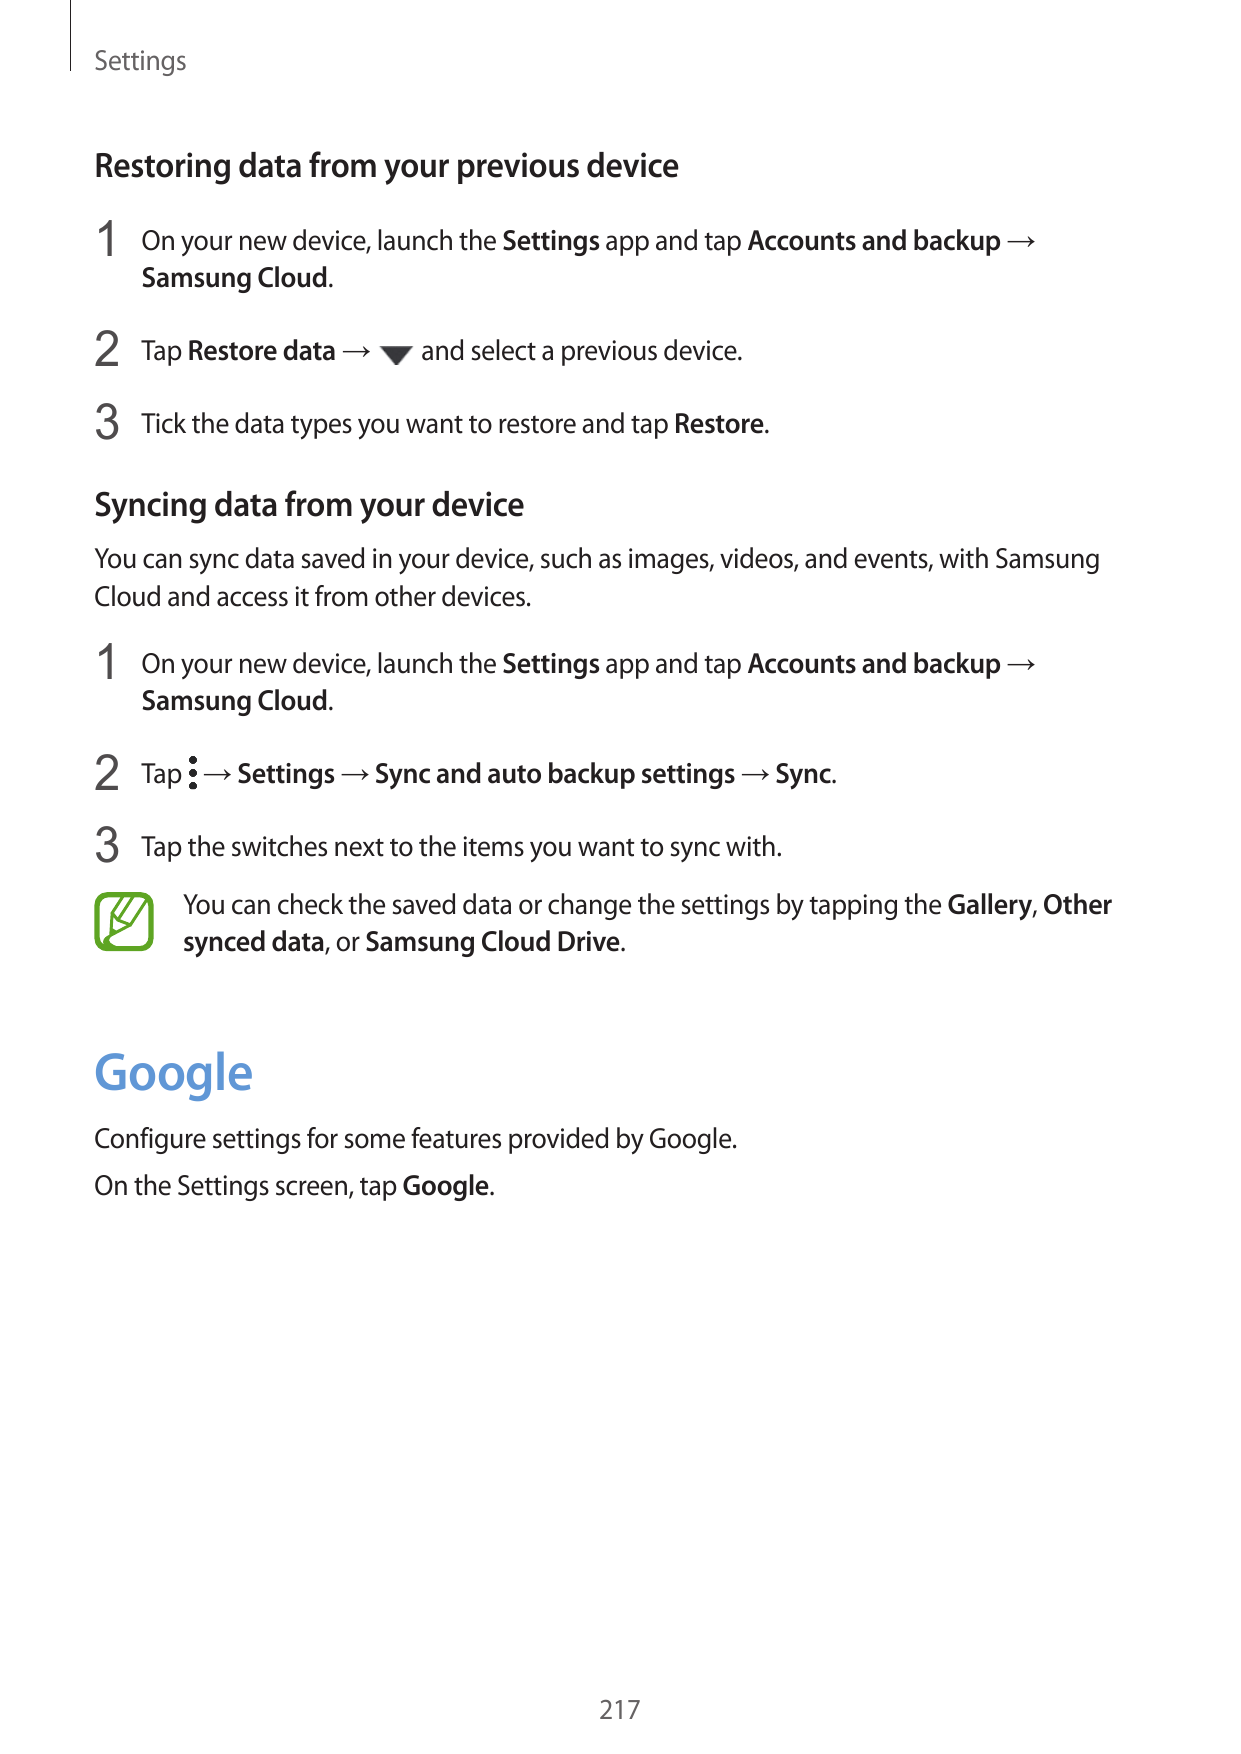 SettingsRestoring data from your previous device1 On your new device, launch the Settings app and tap Accounts and backup →Samsu